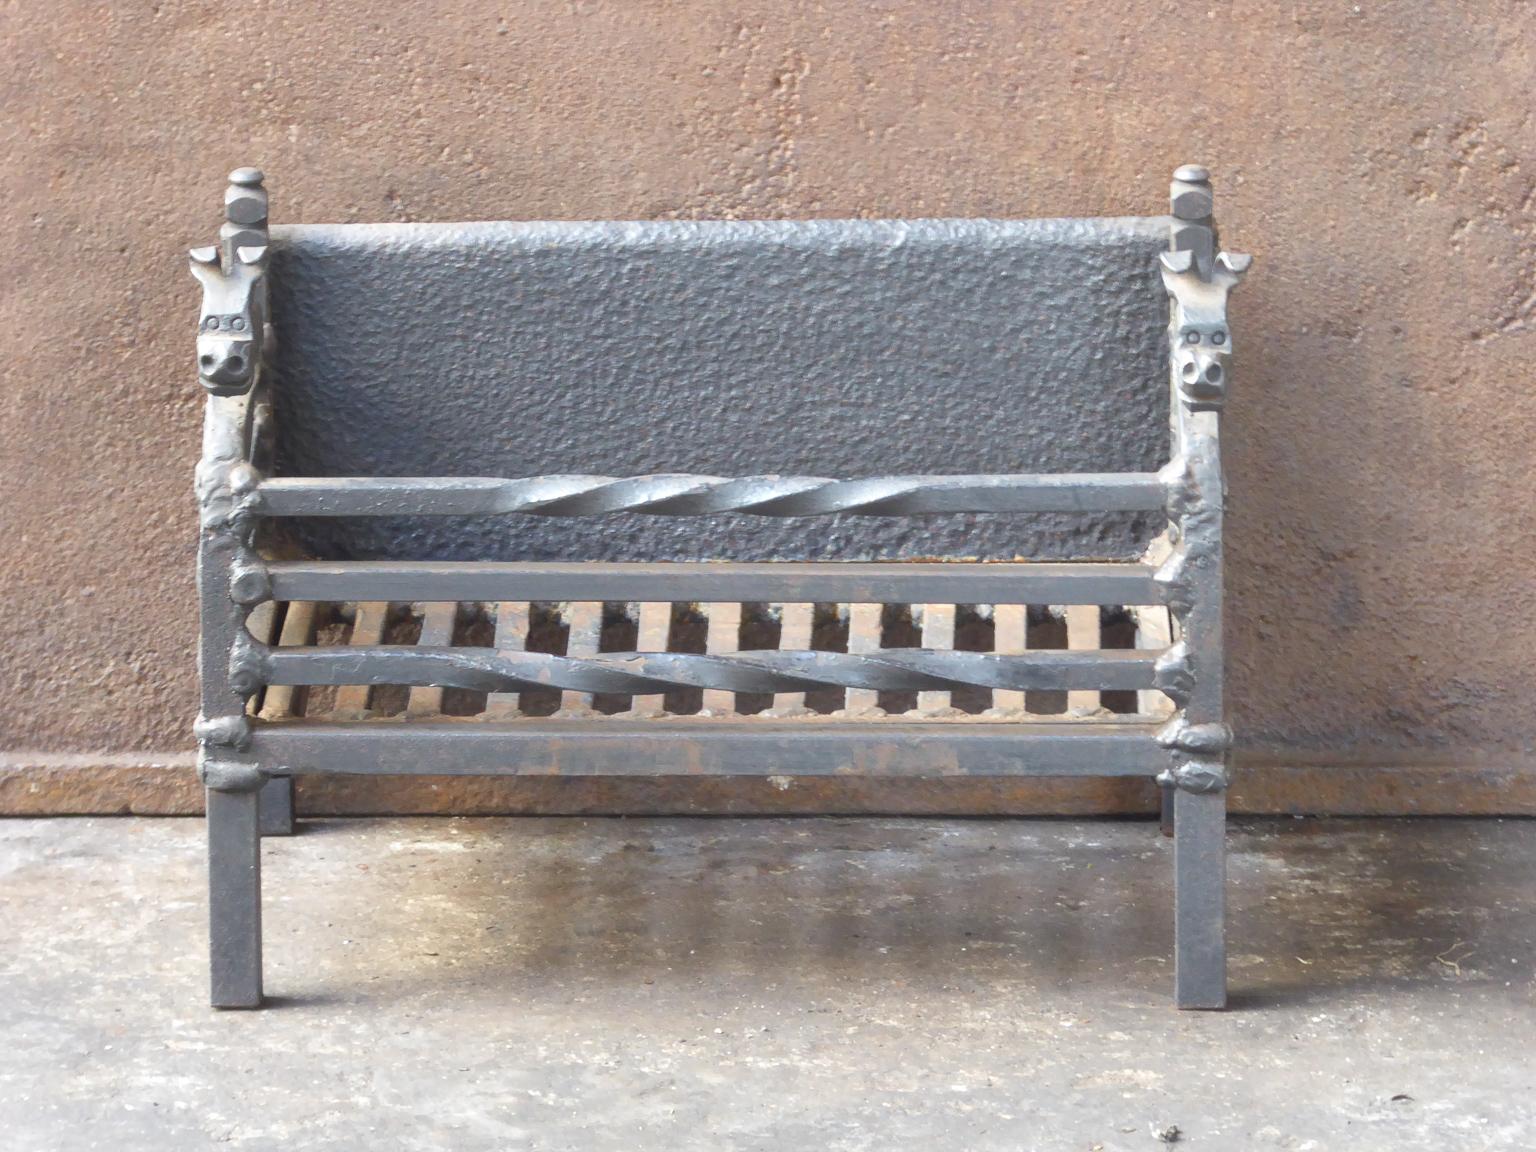 English modernist fireplace basket or fire basket. The fireplace grate is made of wrought iron.

















 